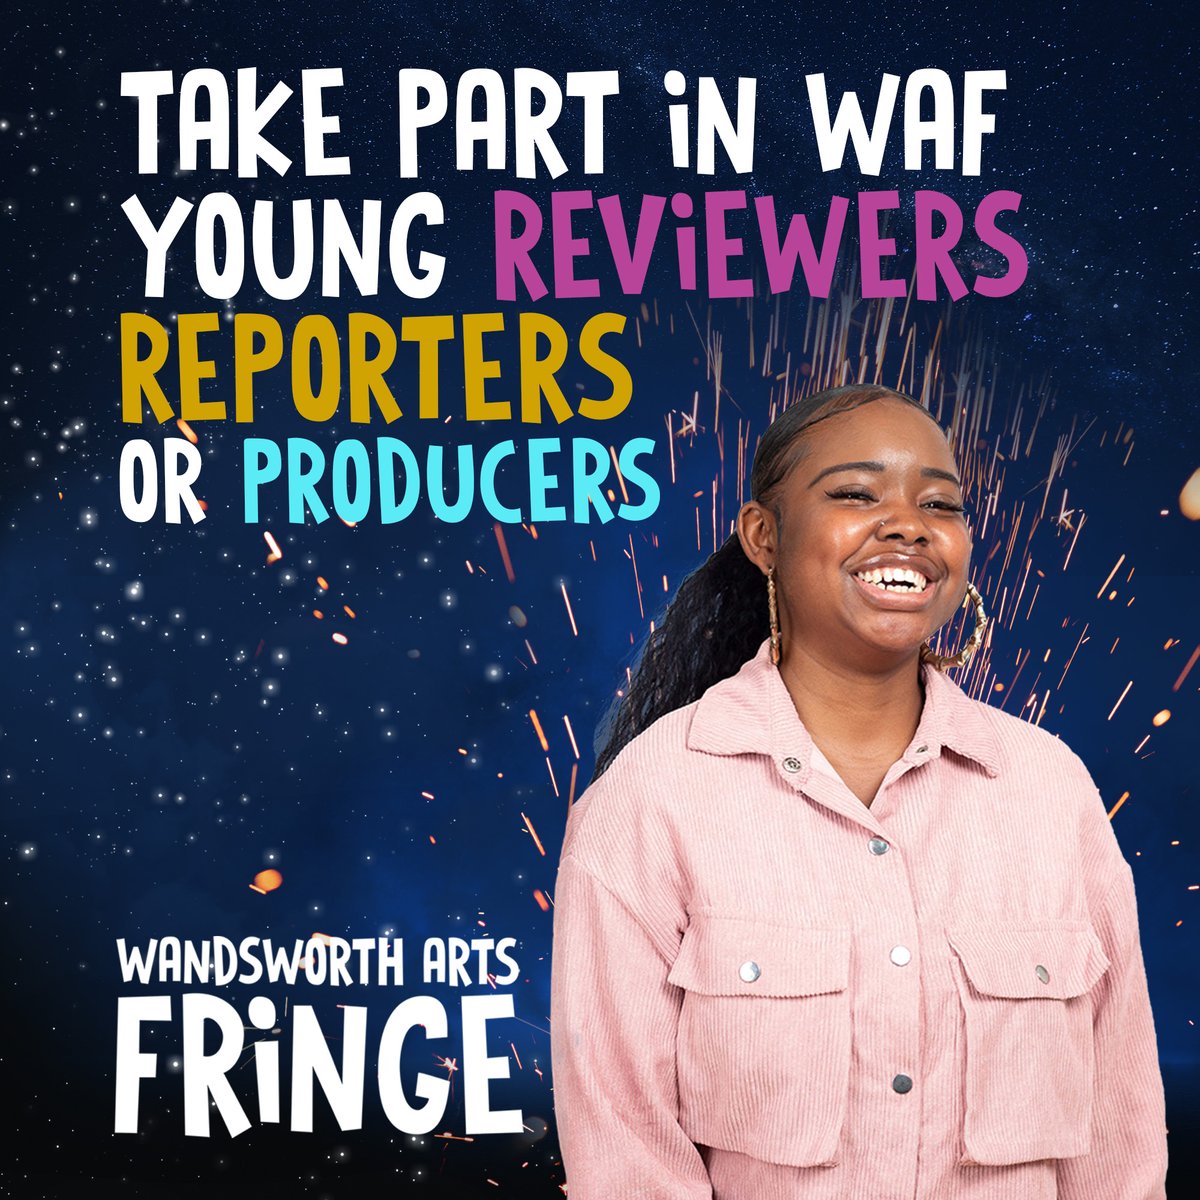 Our friends @WAFfringe are searching for the next generation of Arts Producers, Critics and Reporters! Applications are open for their three creative industry projects for young people aged 14 – 19, who live or study in #Wandsworth. Apply by 29 April> bit.ly/WAFYP_Apply